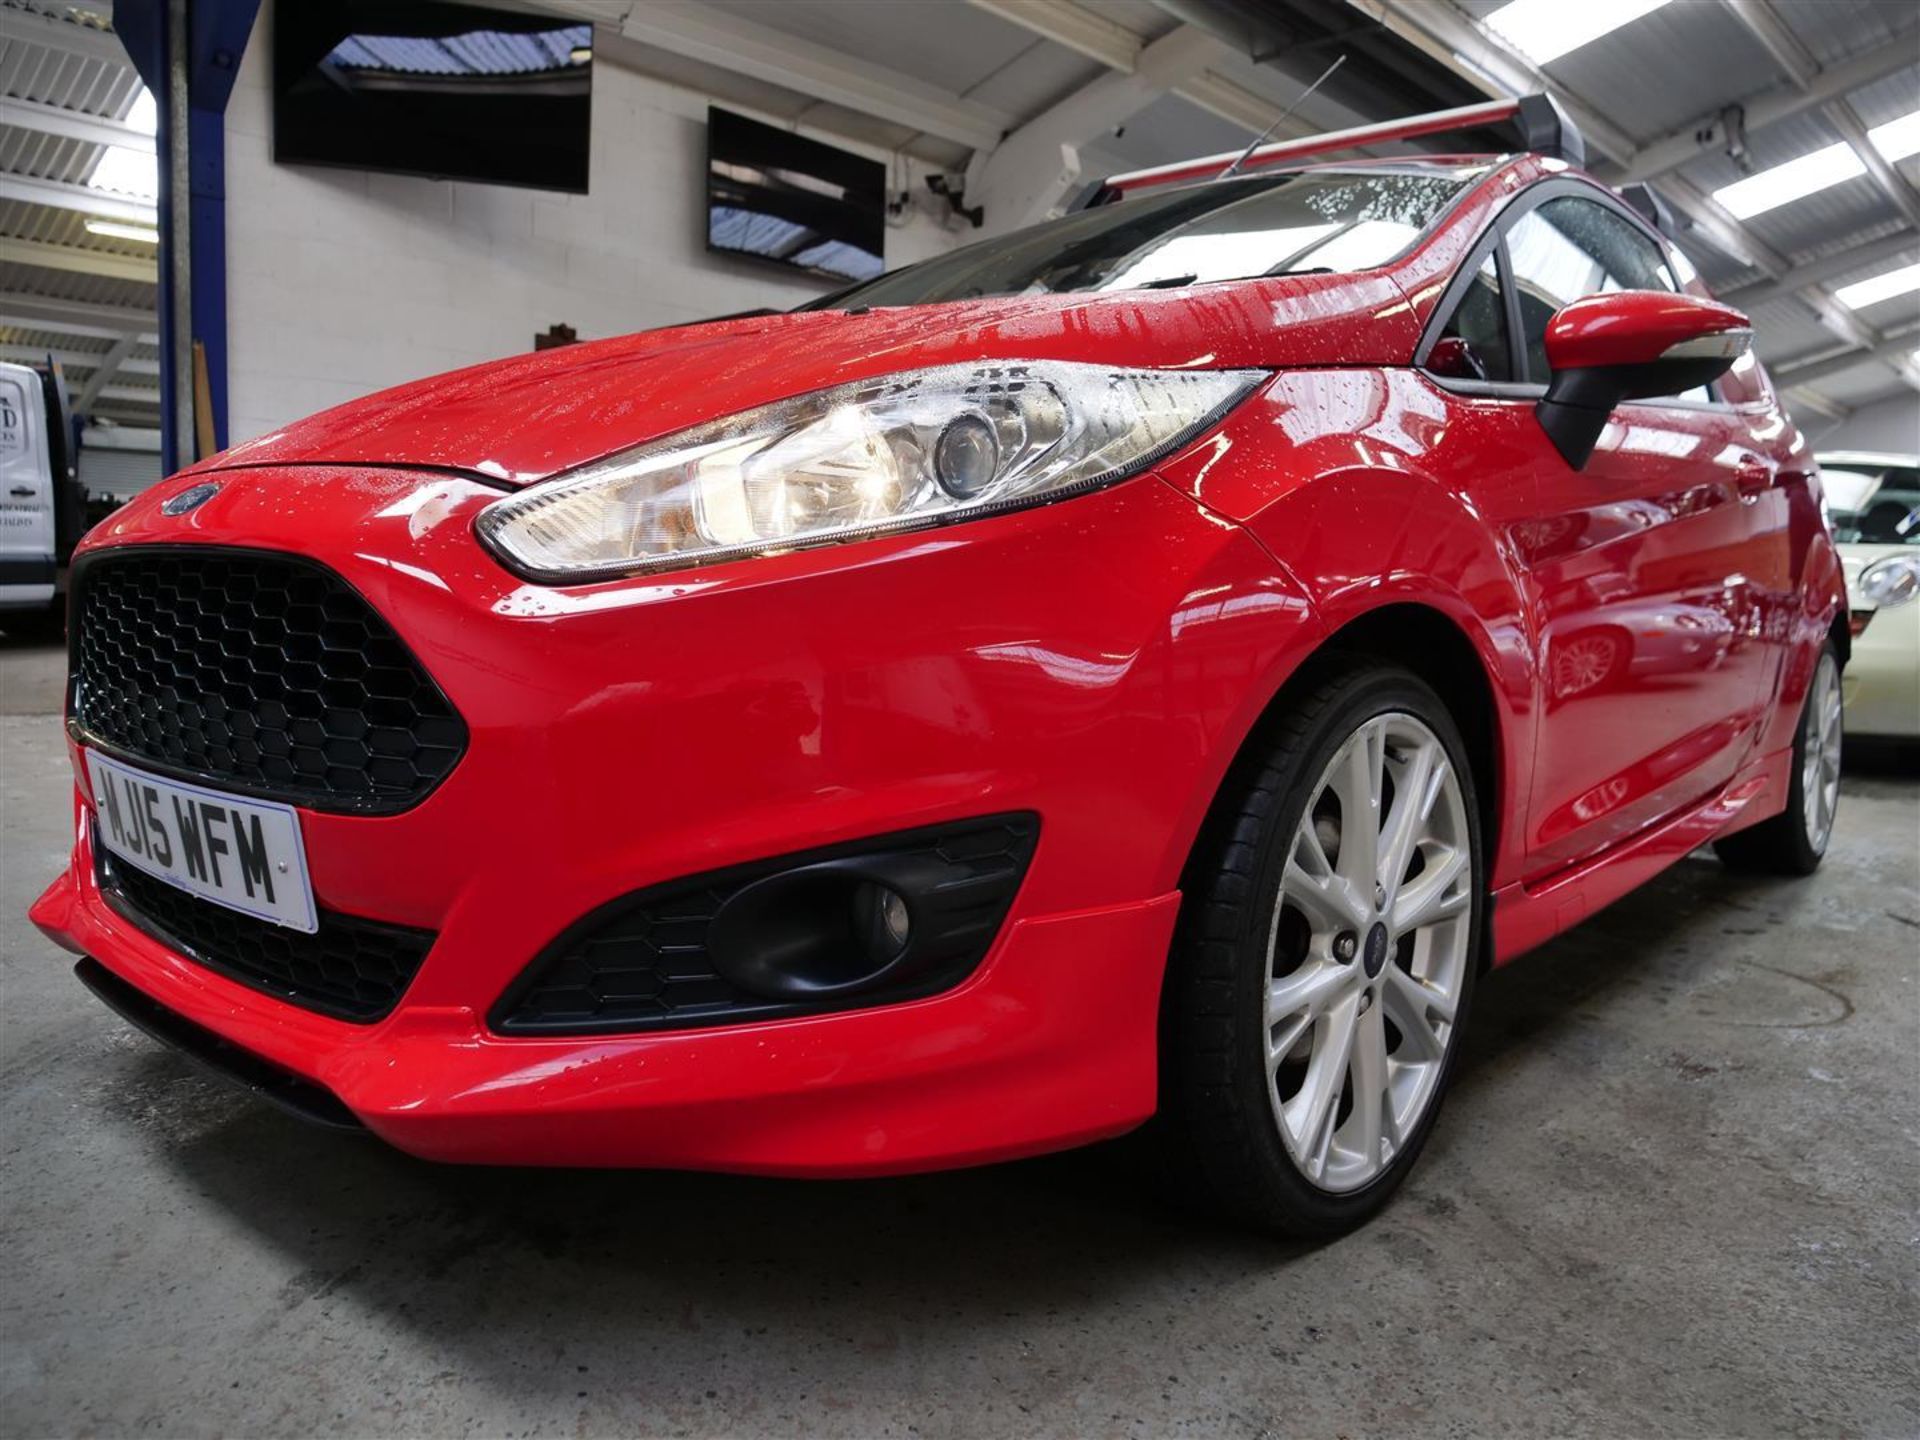 15 15 Ford Fiesta Sport TDCI - Image 18 of 28